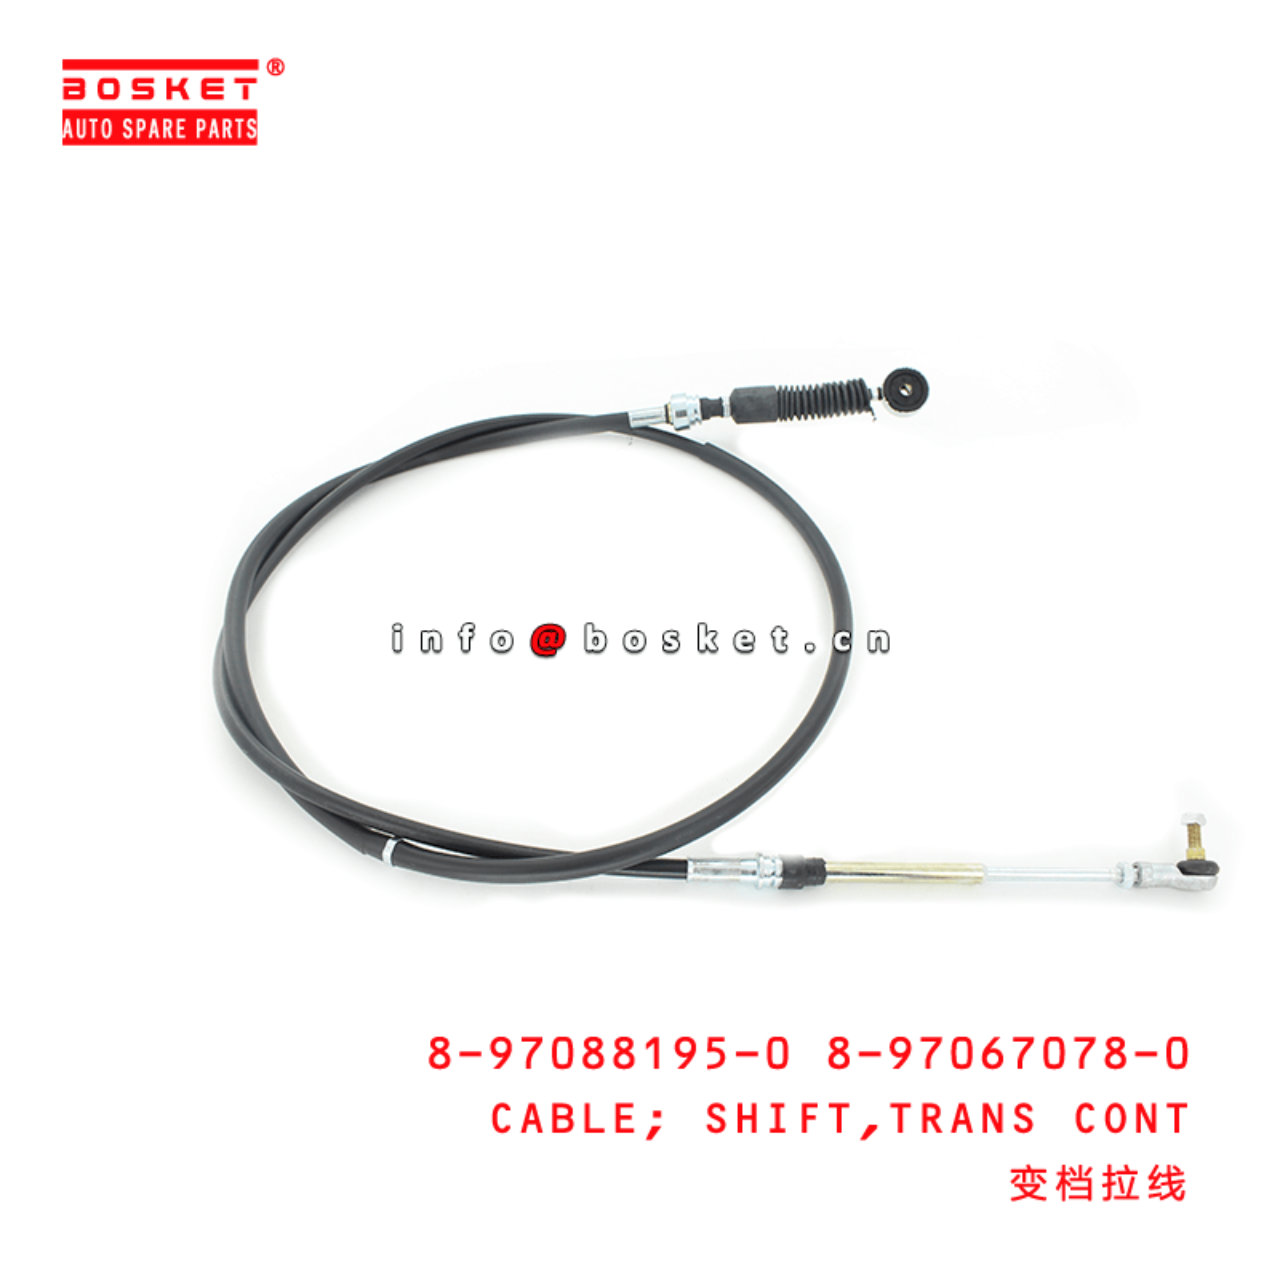 8-97088195-0 8-97067078-0 Transmission Control Shift Cable 8970881950 8970670780 Suitable for ISUZU 